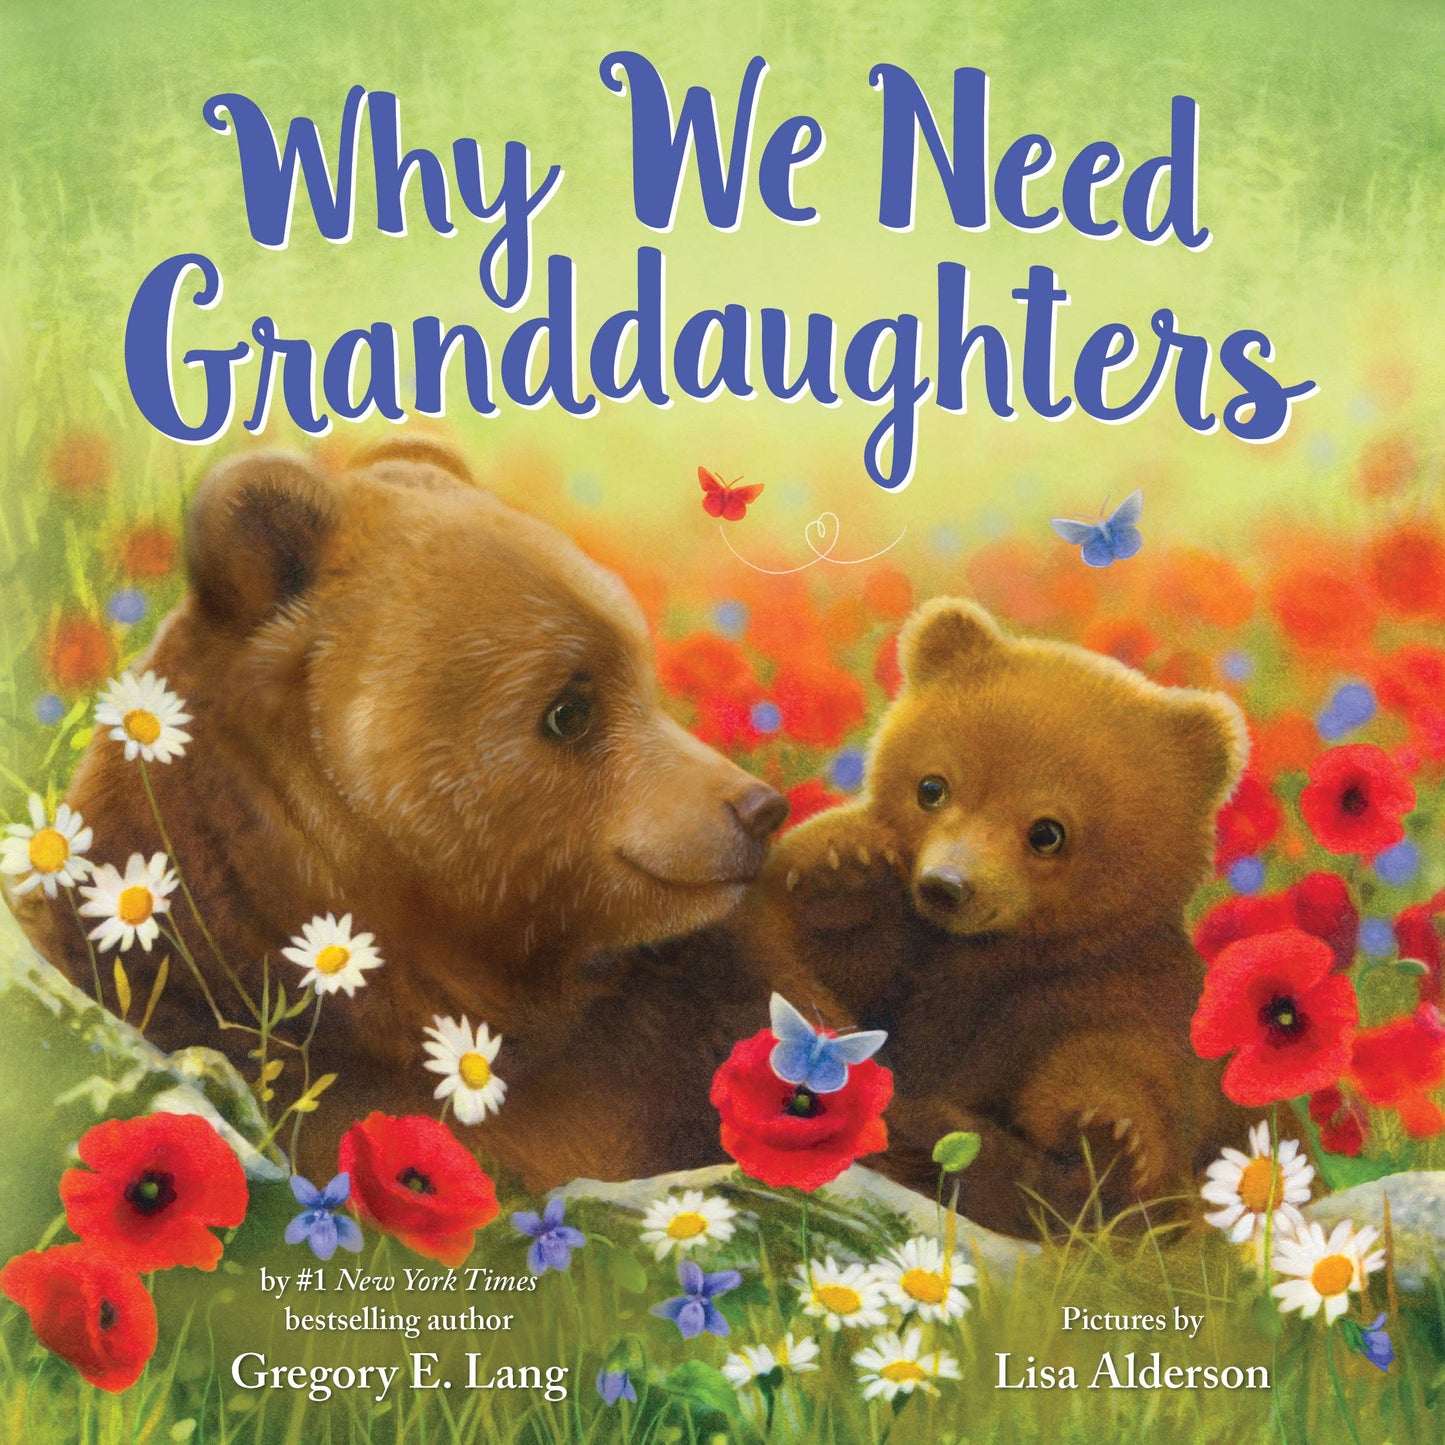 Why We Need Granddaughters (HC)